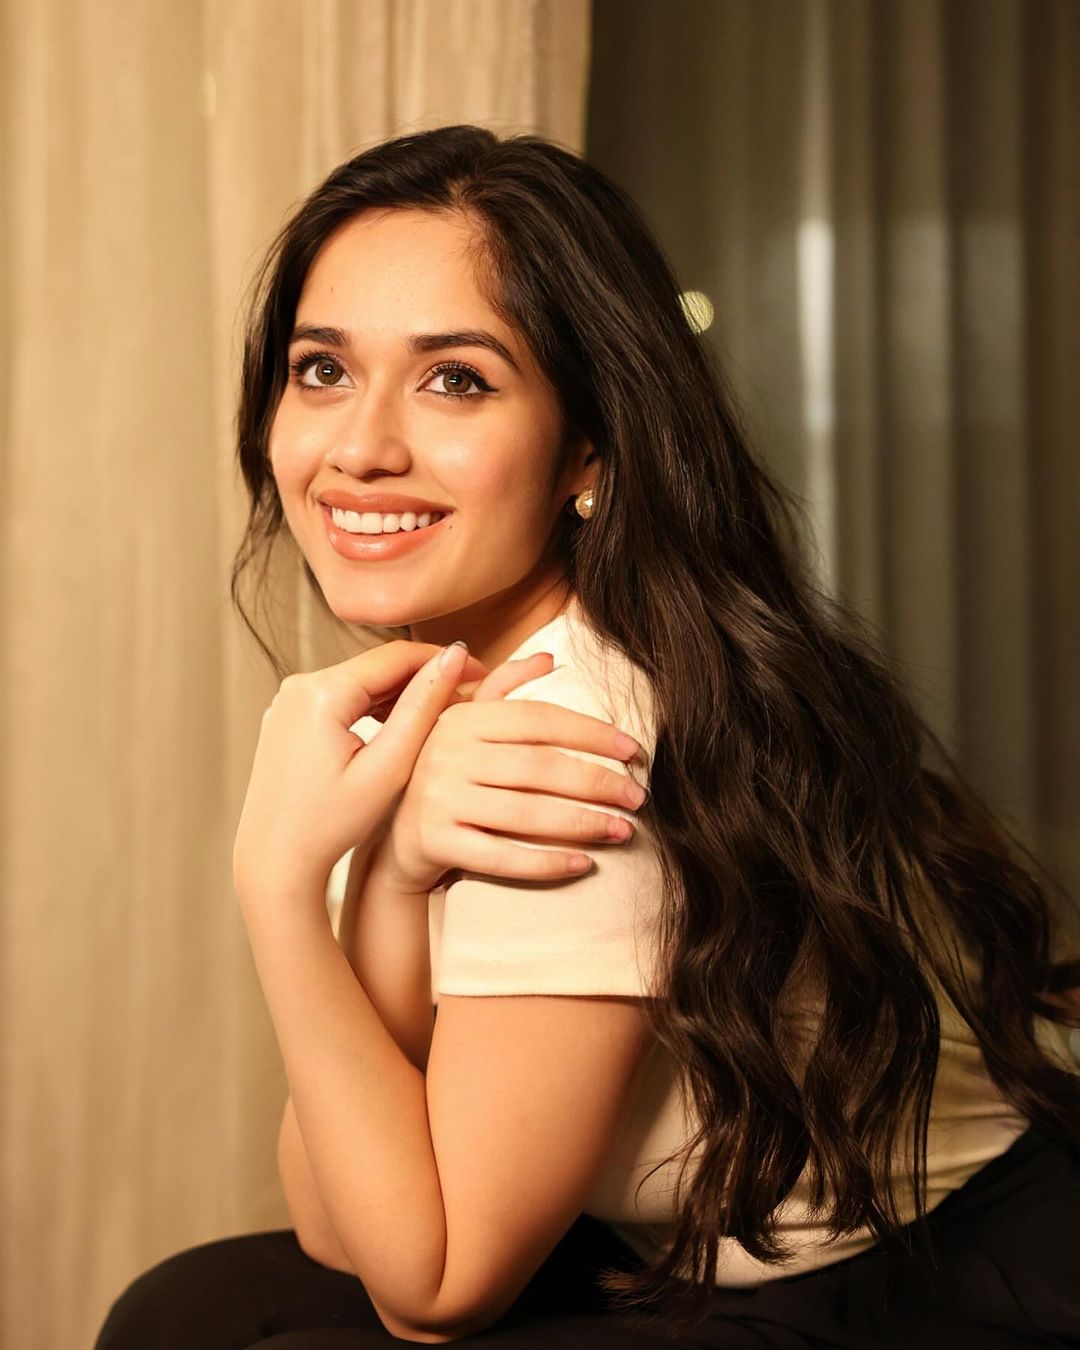 Laughter Chefs Fame Jannat Zubair Expressed Her Desire For This Popular Show’s Return To TV. Wanna Know About It? Explore!